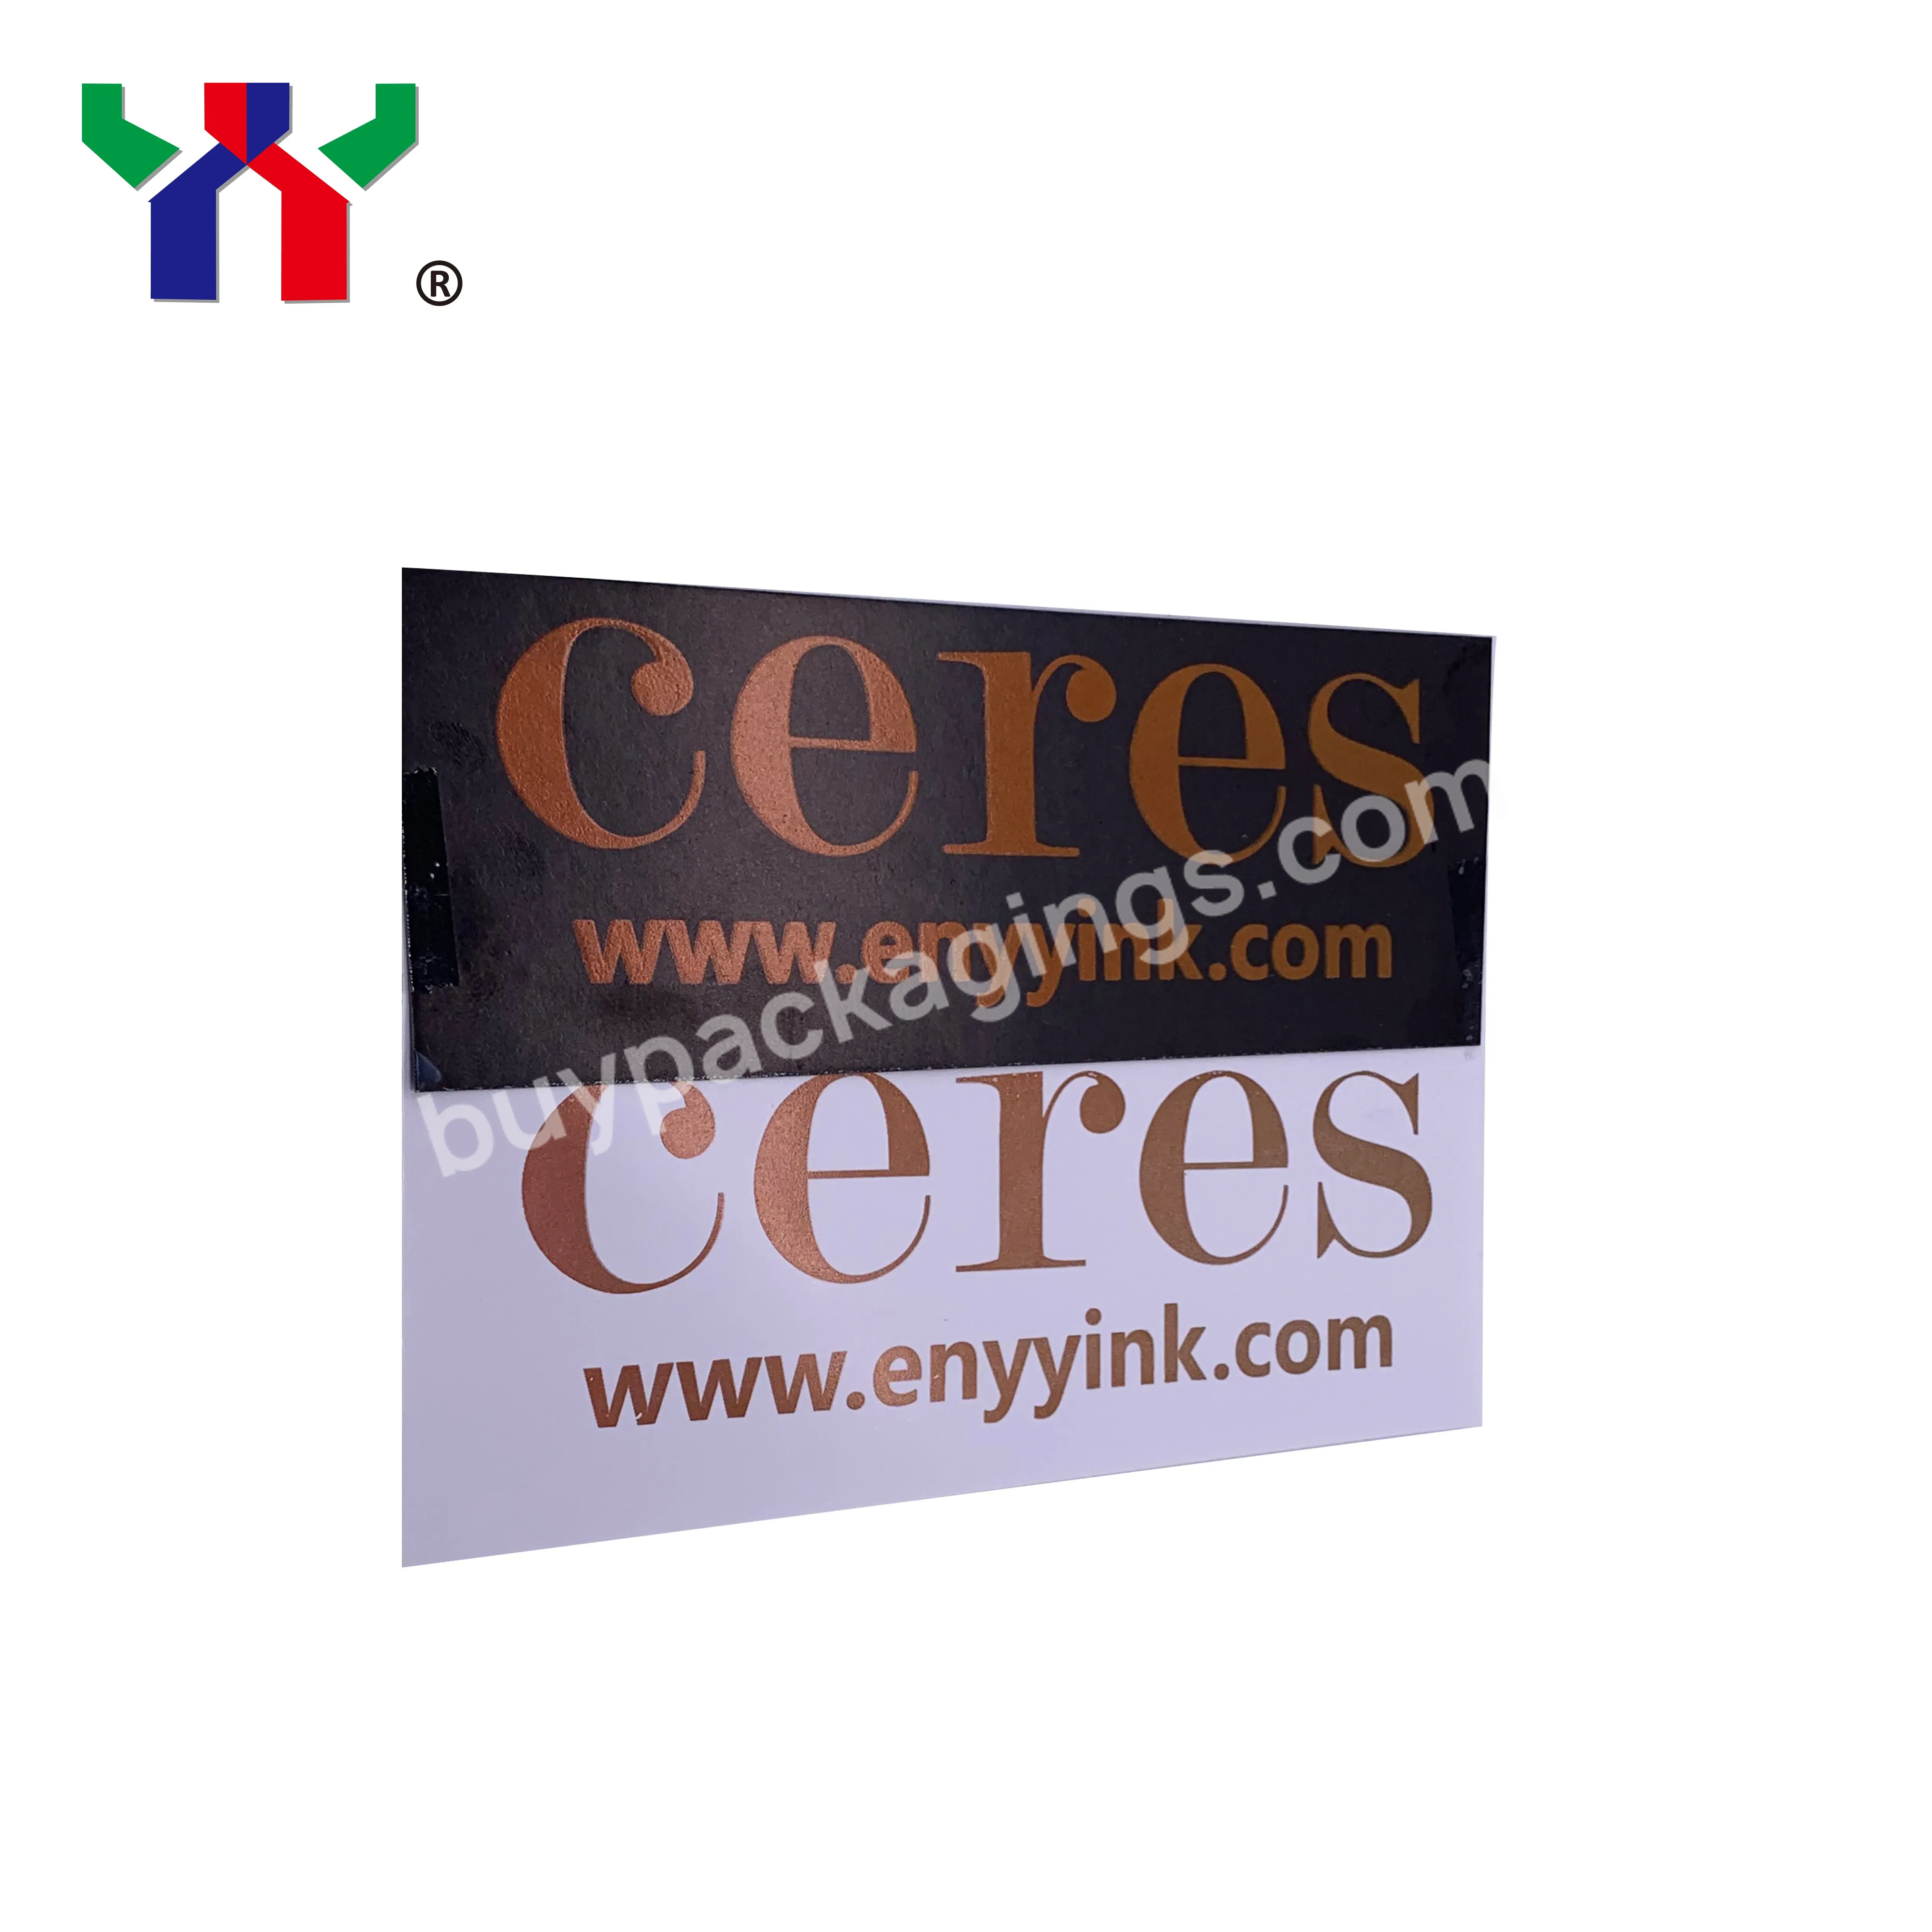 Ceres Screen Printing Security Ink/optical Variable Ink,100 G/bottle,Yy 2 Brown To Gold - Buy Optical Variable Ink,Solvent Printing Ink,Security Ink.